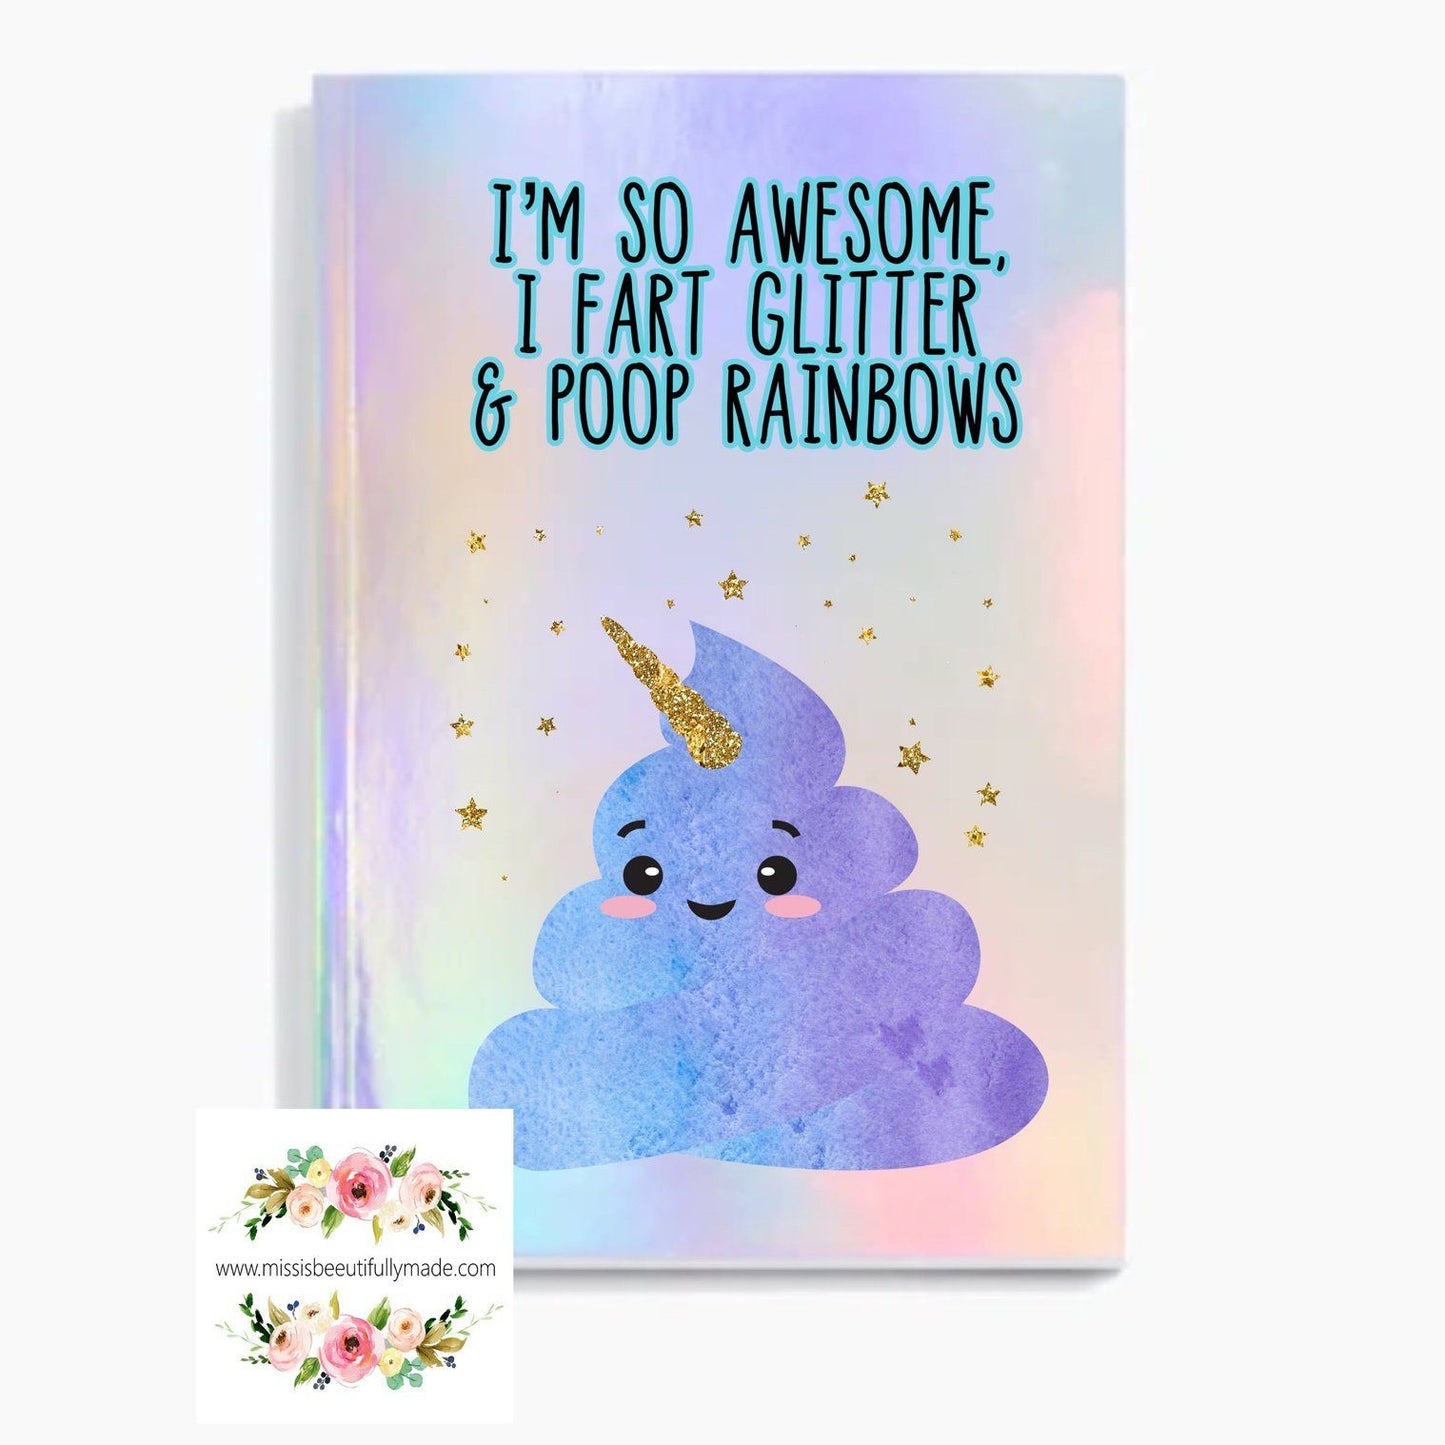 Iridescent Notebook - I’m so awesome I fart glitter & poop rainbows